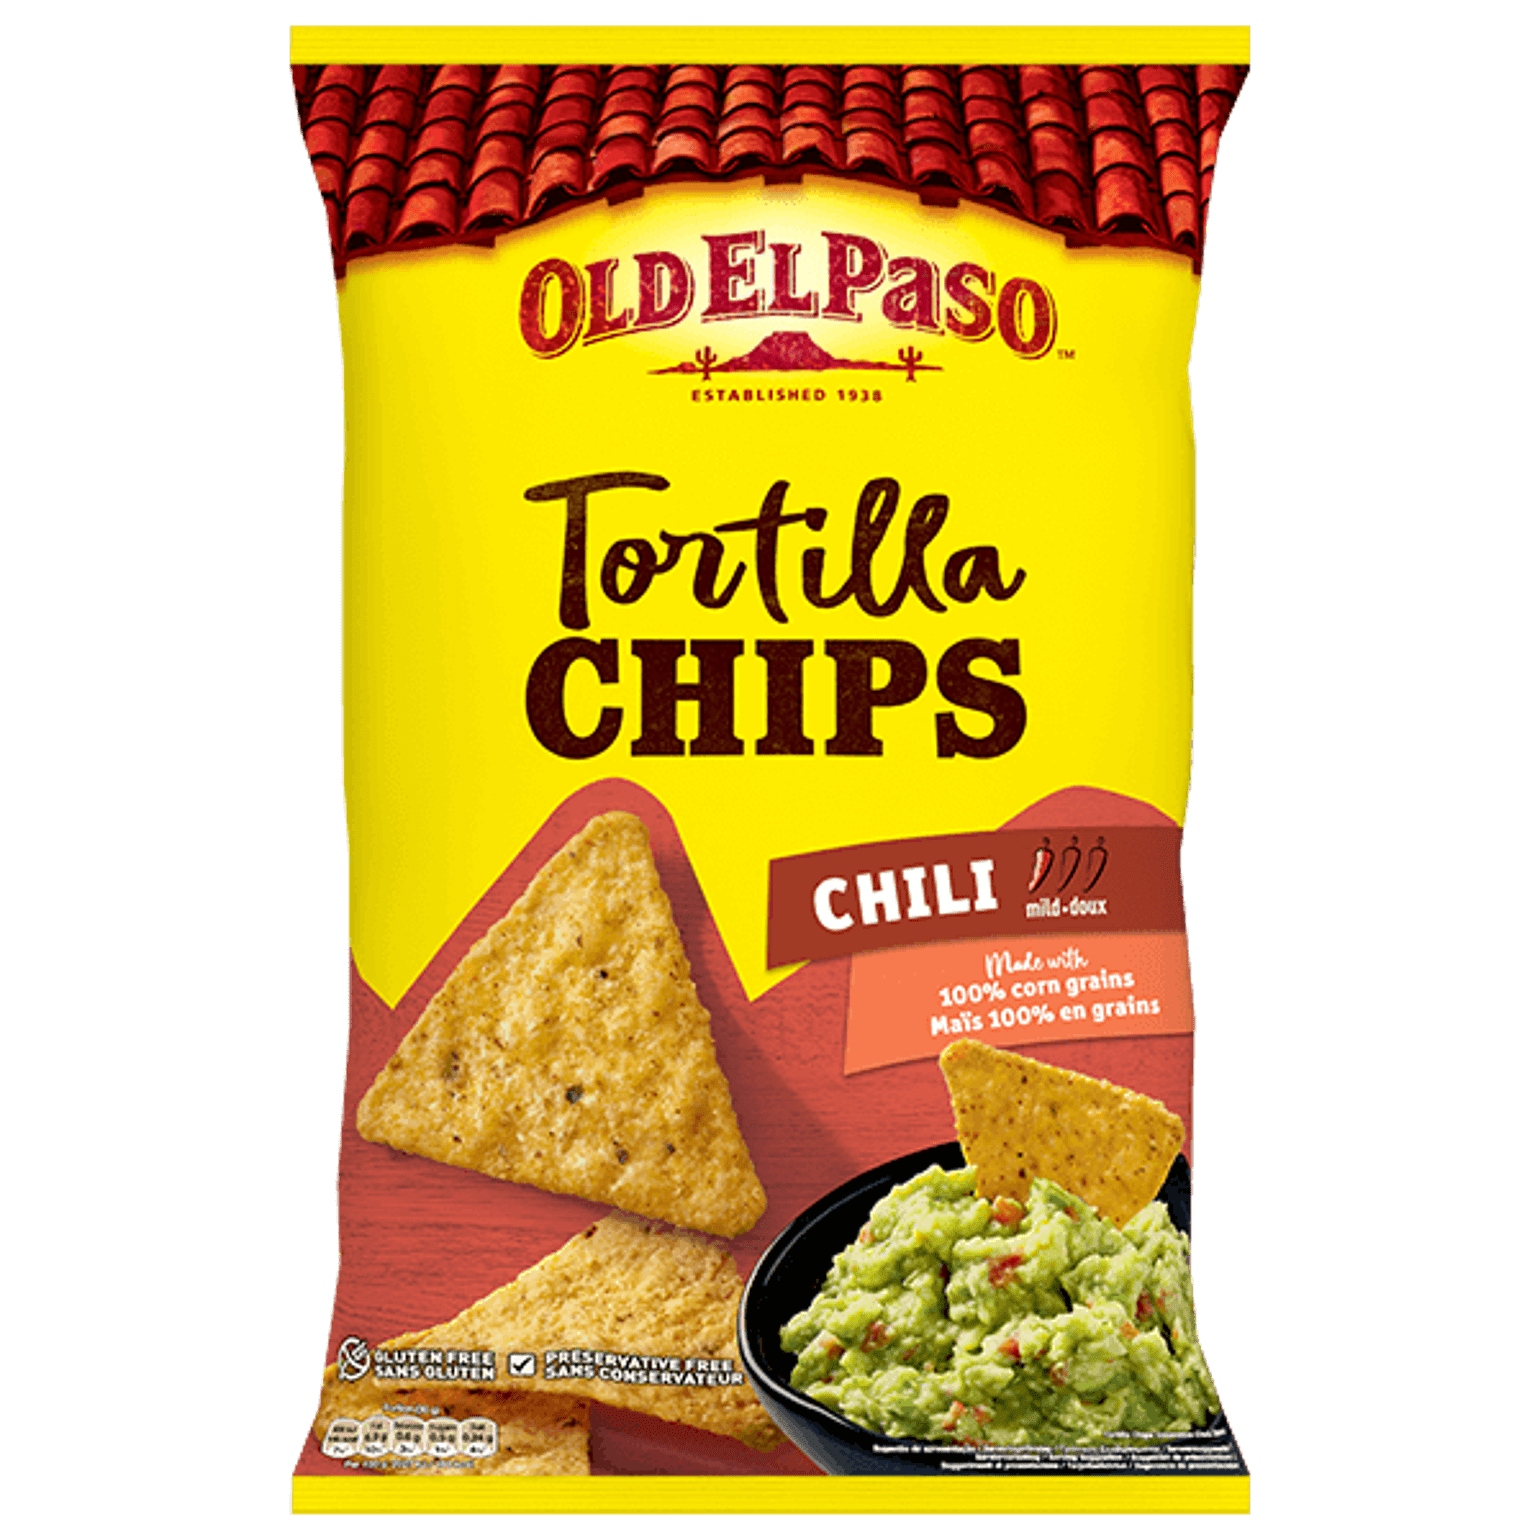 pack of Old El Paso's chili tortilla chips (450g)